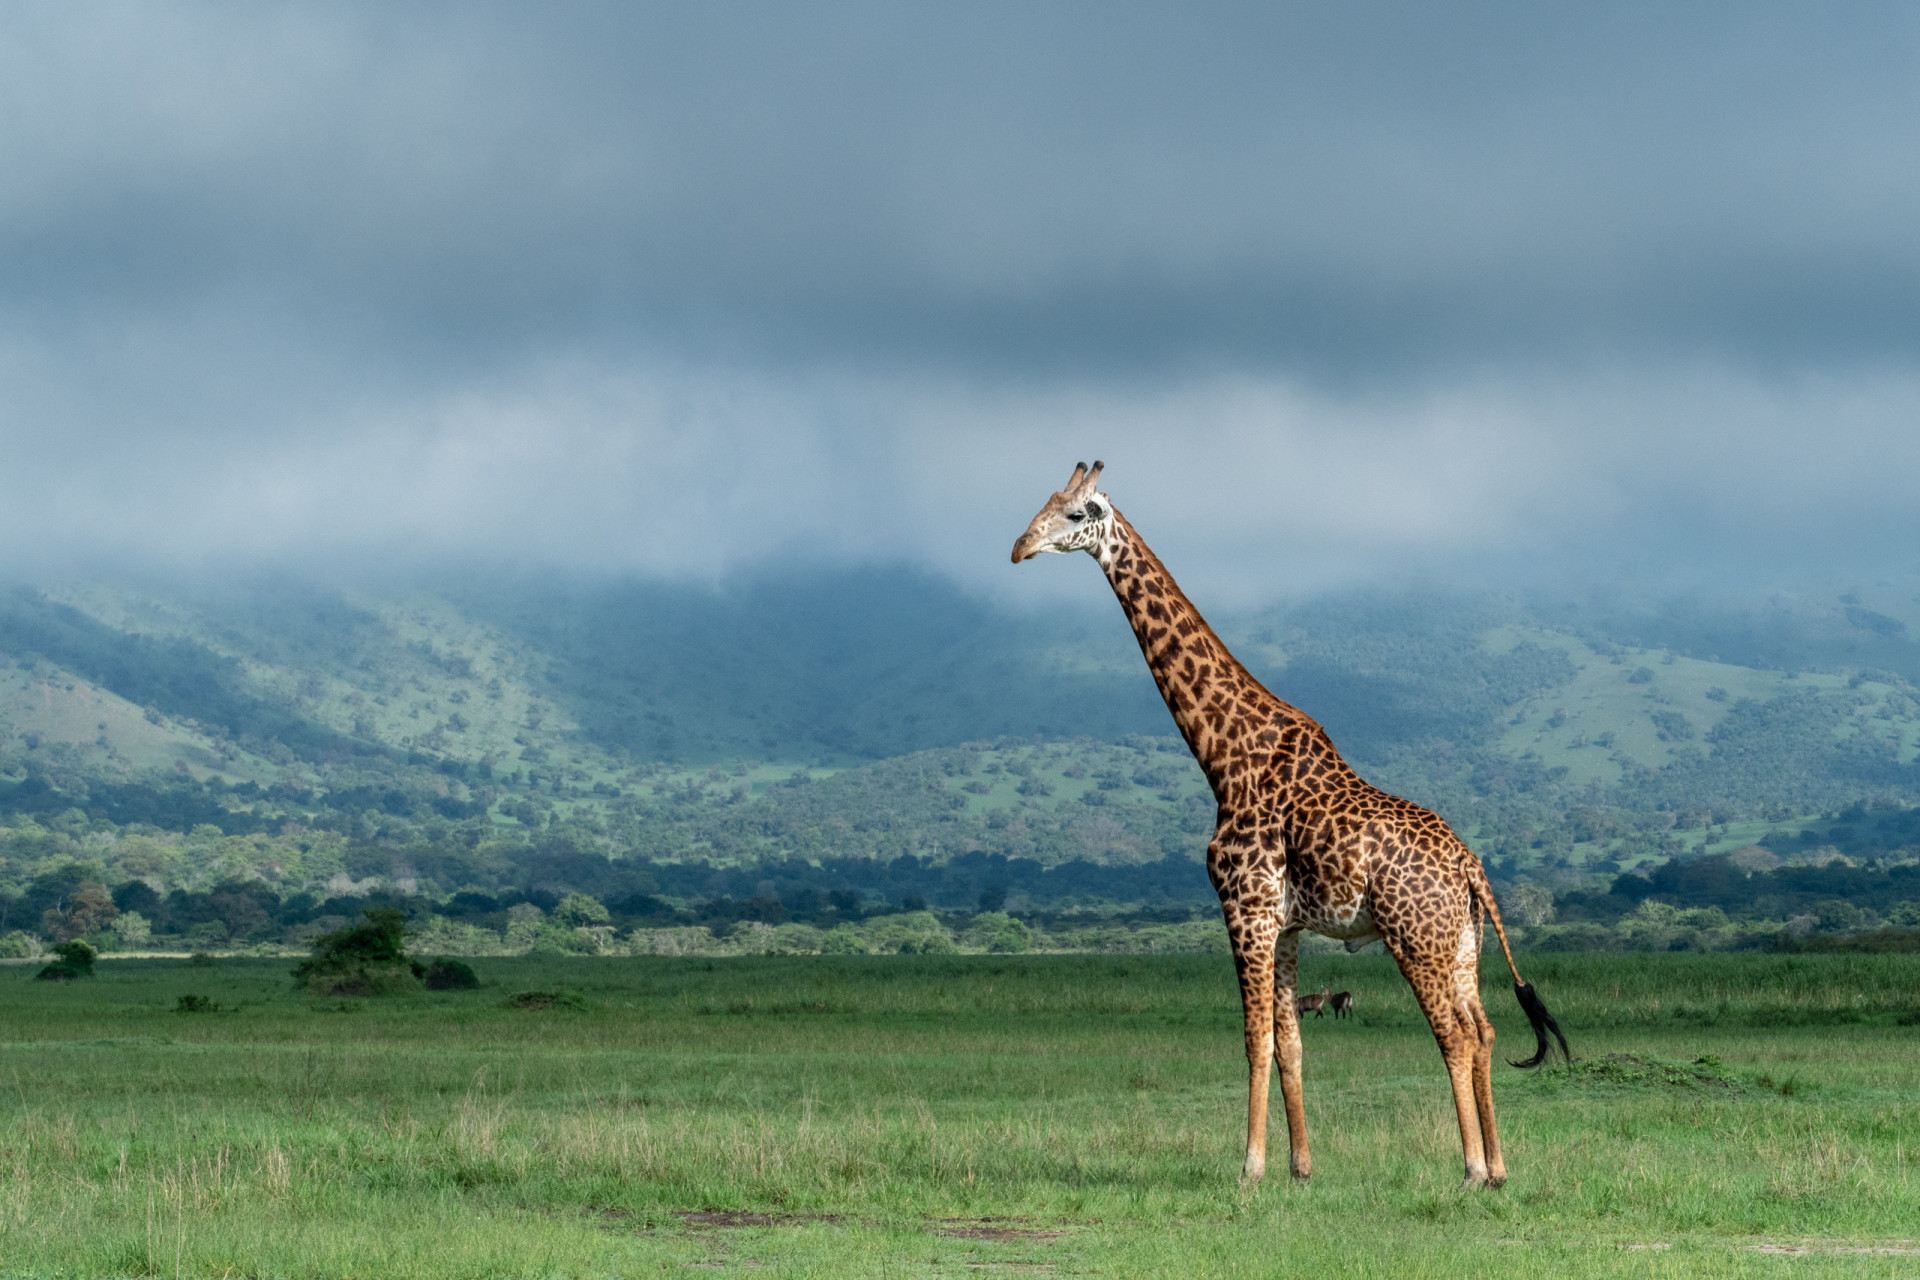 <p>Over in Africa, Akagera National Park in Rwanda is celebrating its 90th anniversary in 2024. This patchwork of woodland, savanna, and swamps is teeming with wildlife. Surprisingly, the park was once decimated in 1994, and it is only recently that efforts have been made to restore it.</p><p>You may also like:<a href="https://www.starsinsider.com/n/404397?utm_source=msn.com&utm_medium=display&utm_campaign=referral_description&utm_content=701834en-us"> Hilarious celebrity wedding mishaps</a></p>